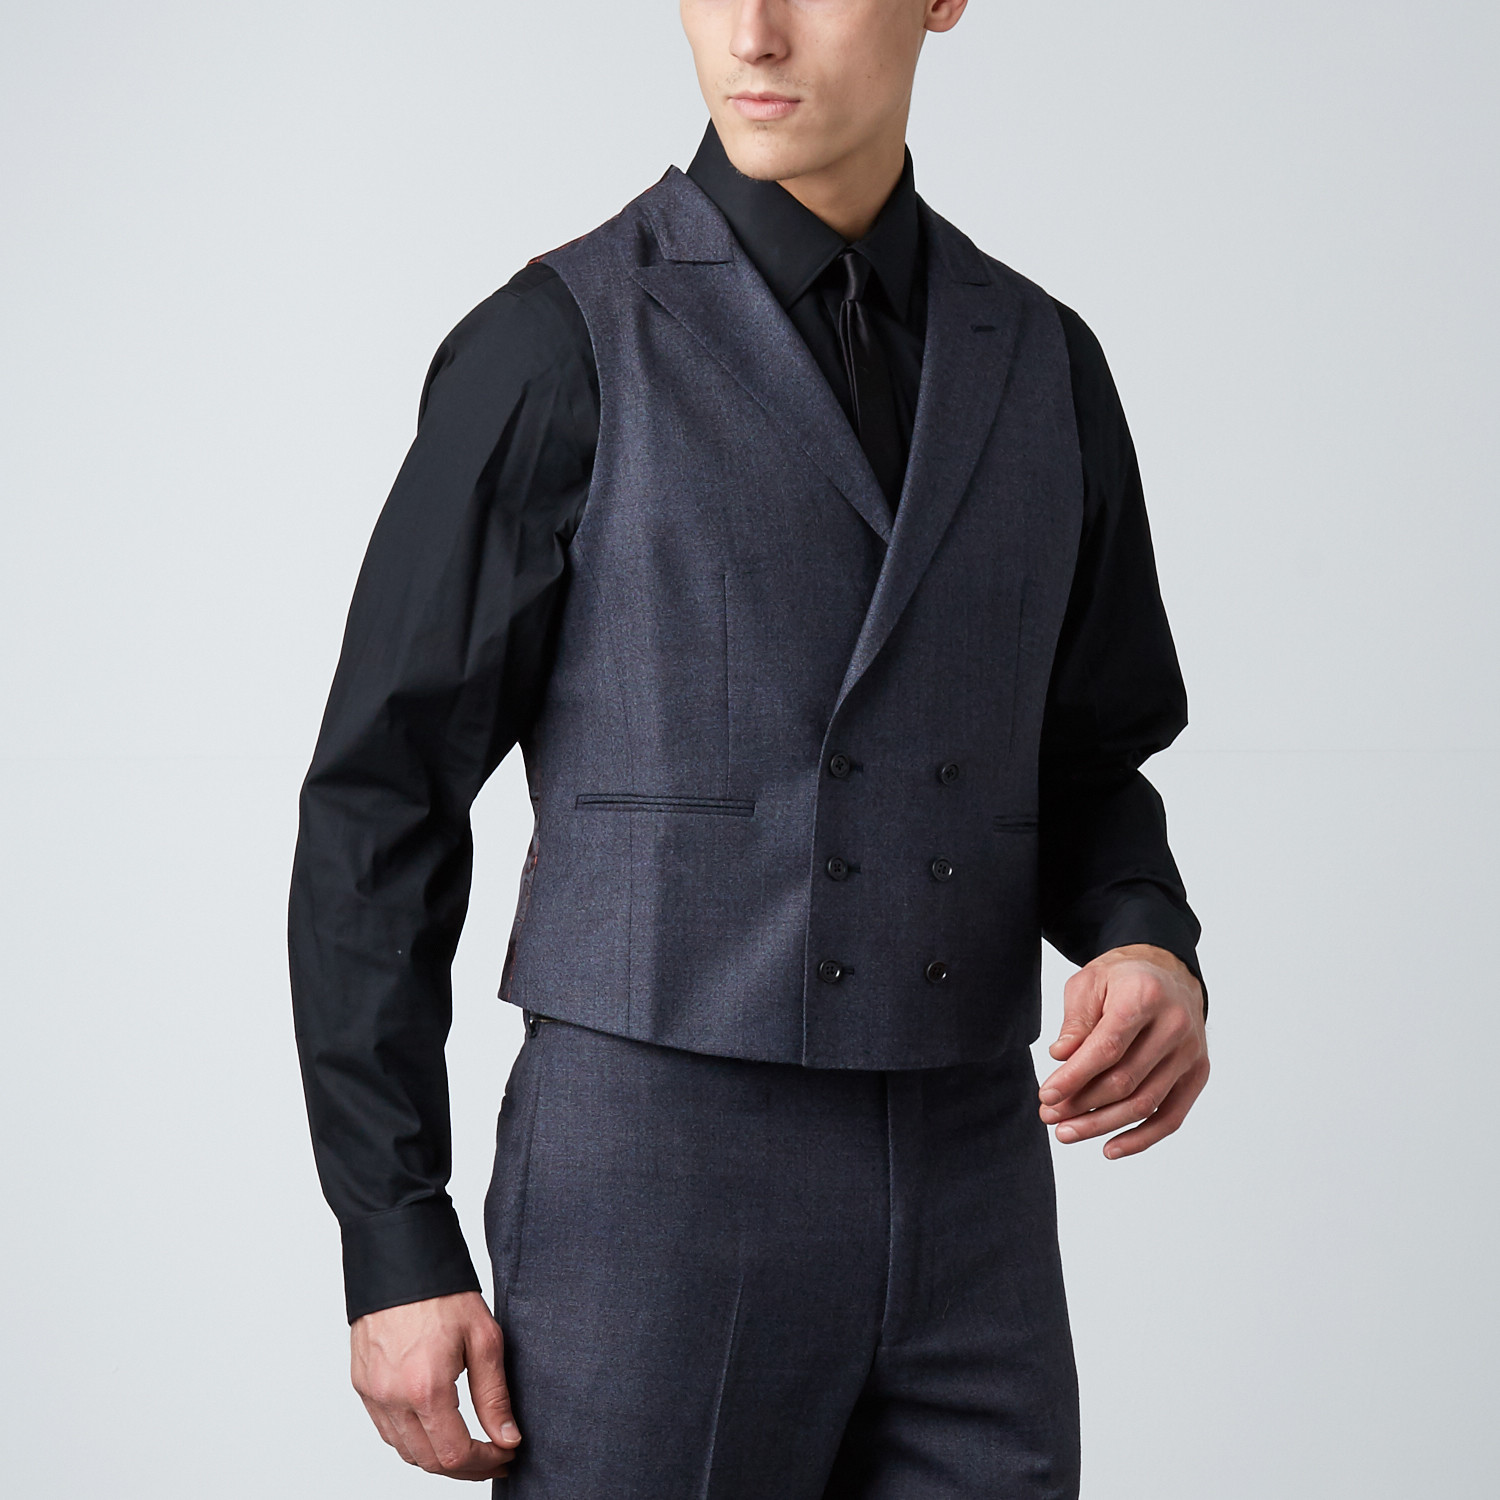 2 Button Double Breasted High Peak Lapel Vested Wool Suit // Gray ...